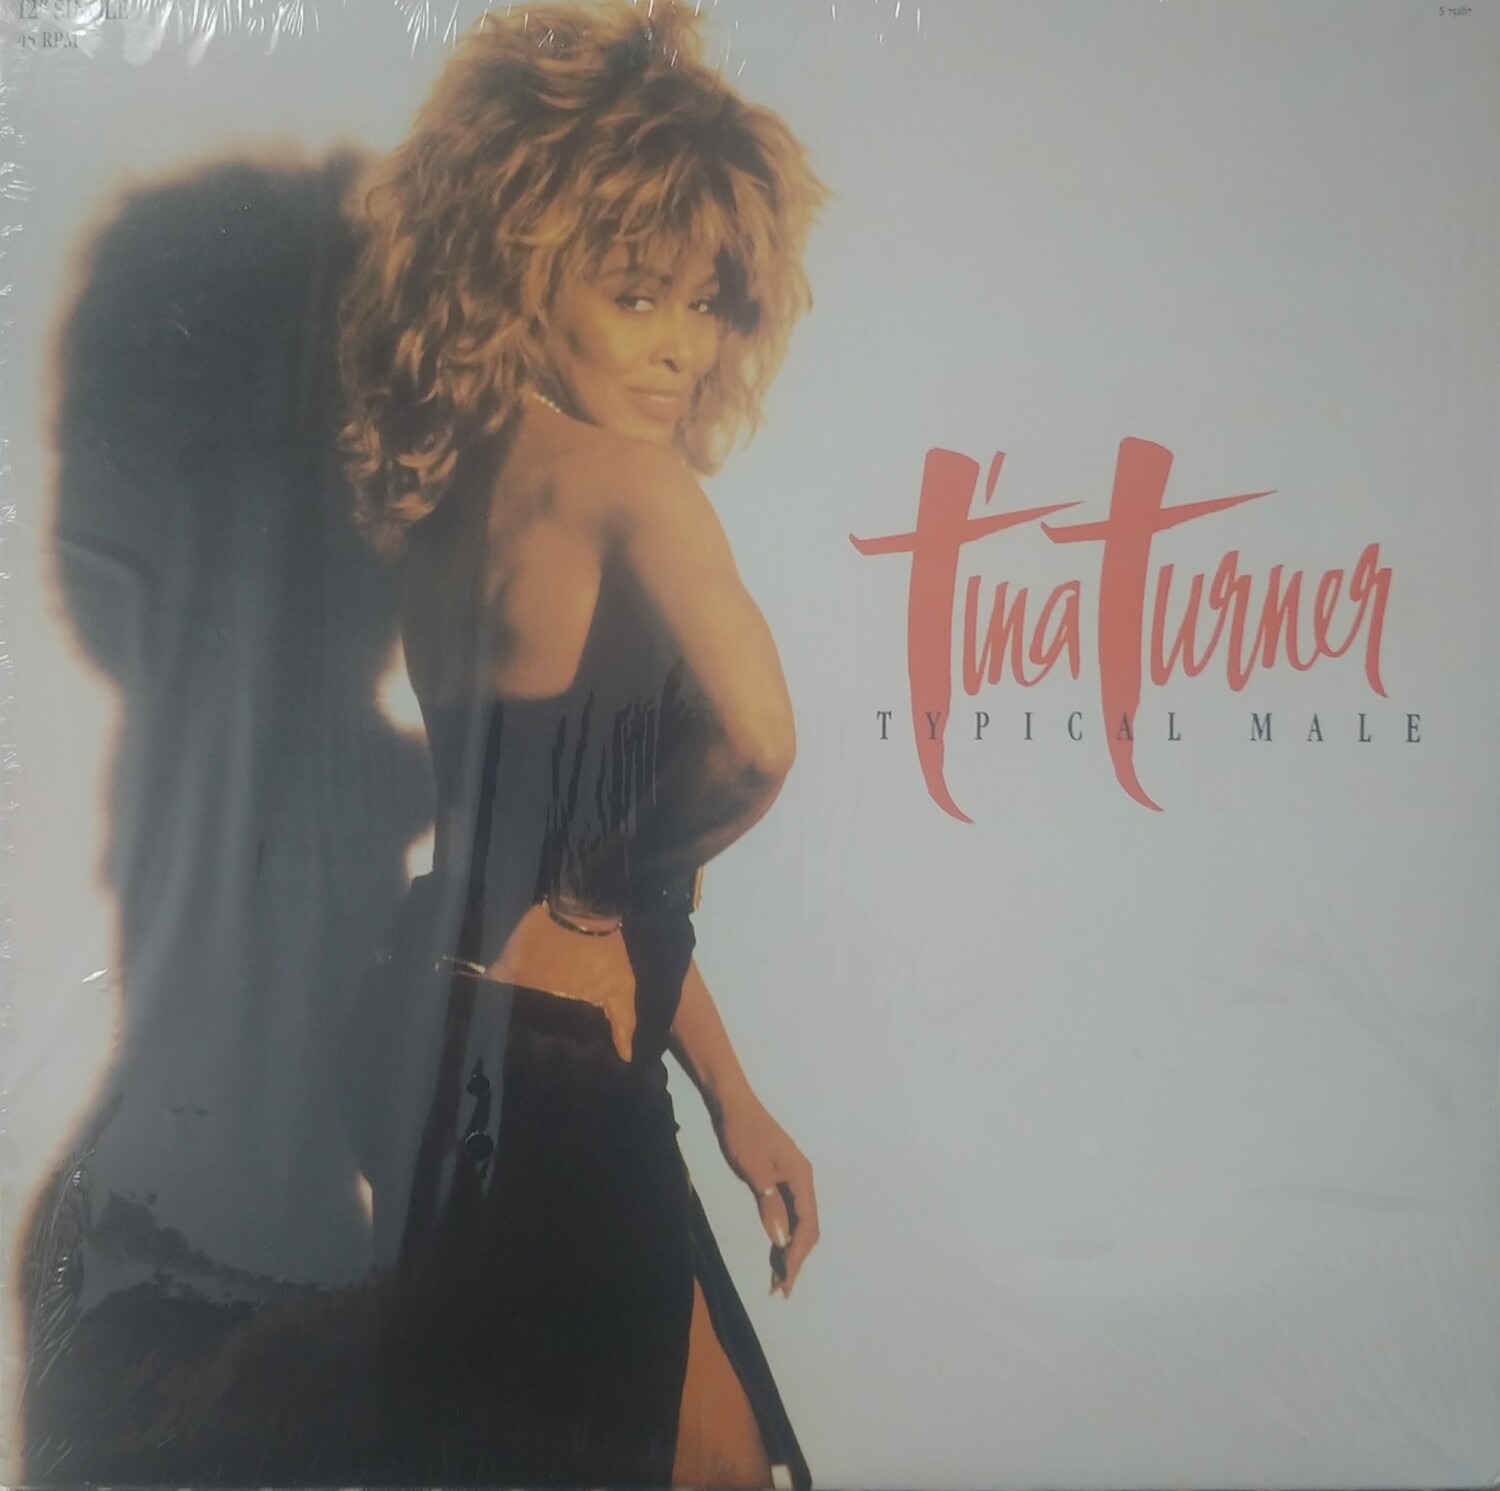 Tina Turner - Typical Male (Maxi)